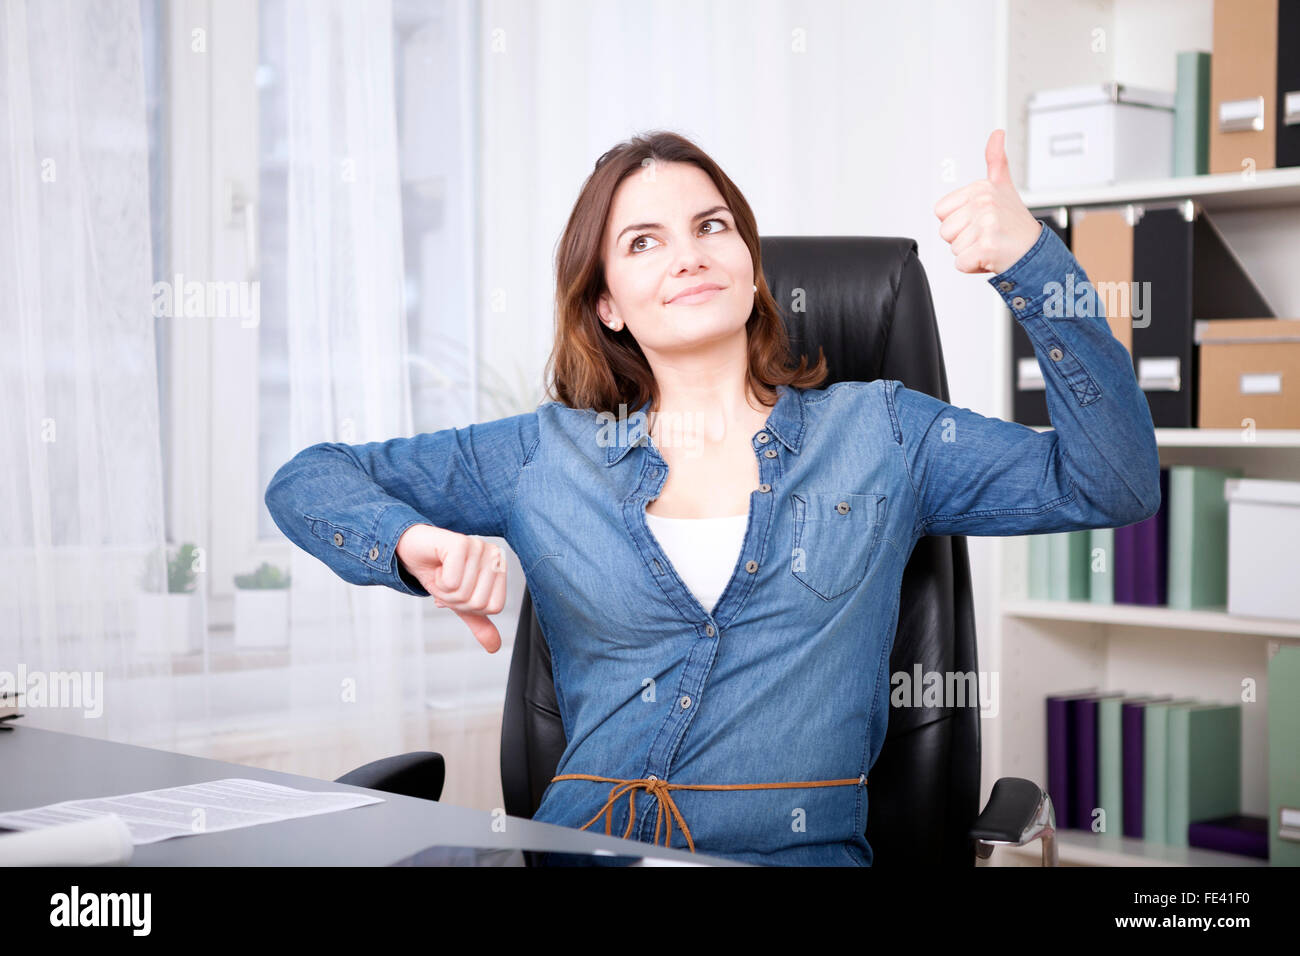 Close up Thoughtful Young Office Woman Sitting on her Chair Showing Thumbs Up and Down Hand Signs While Looking Up. Stock Photo